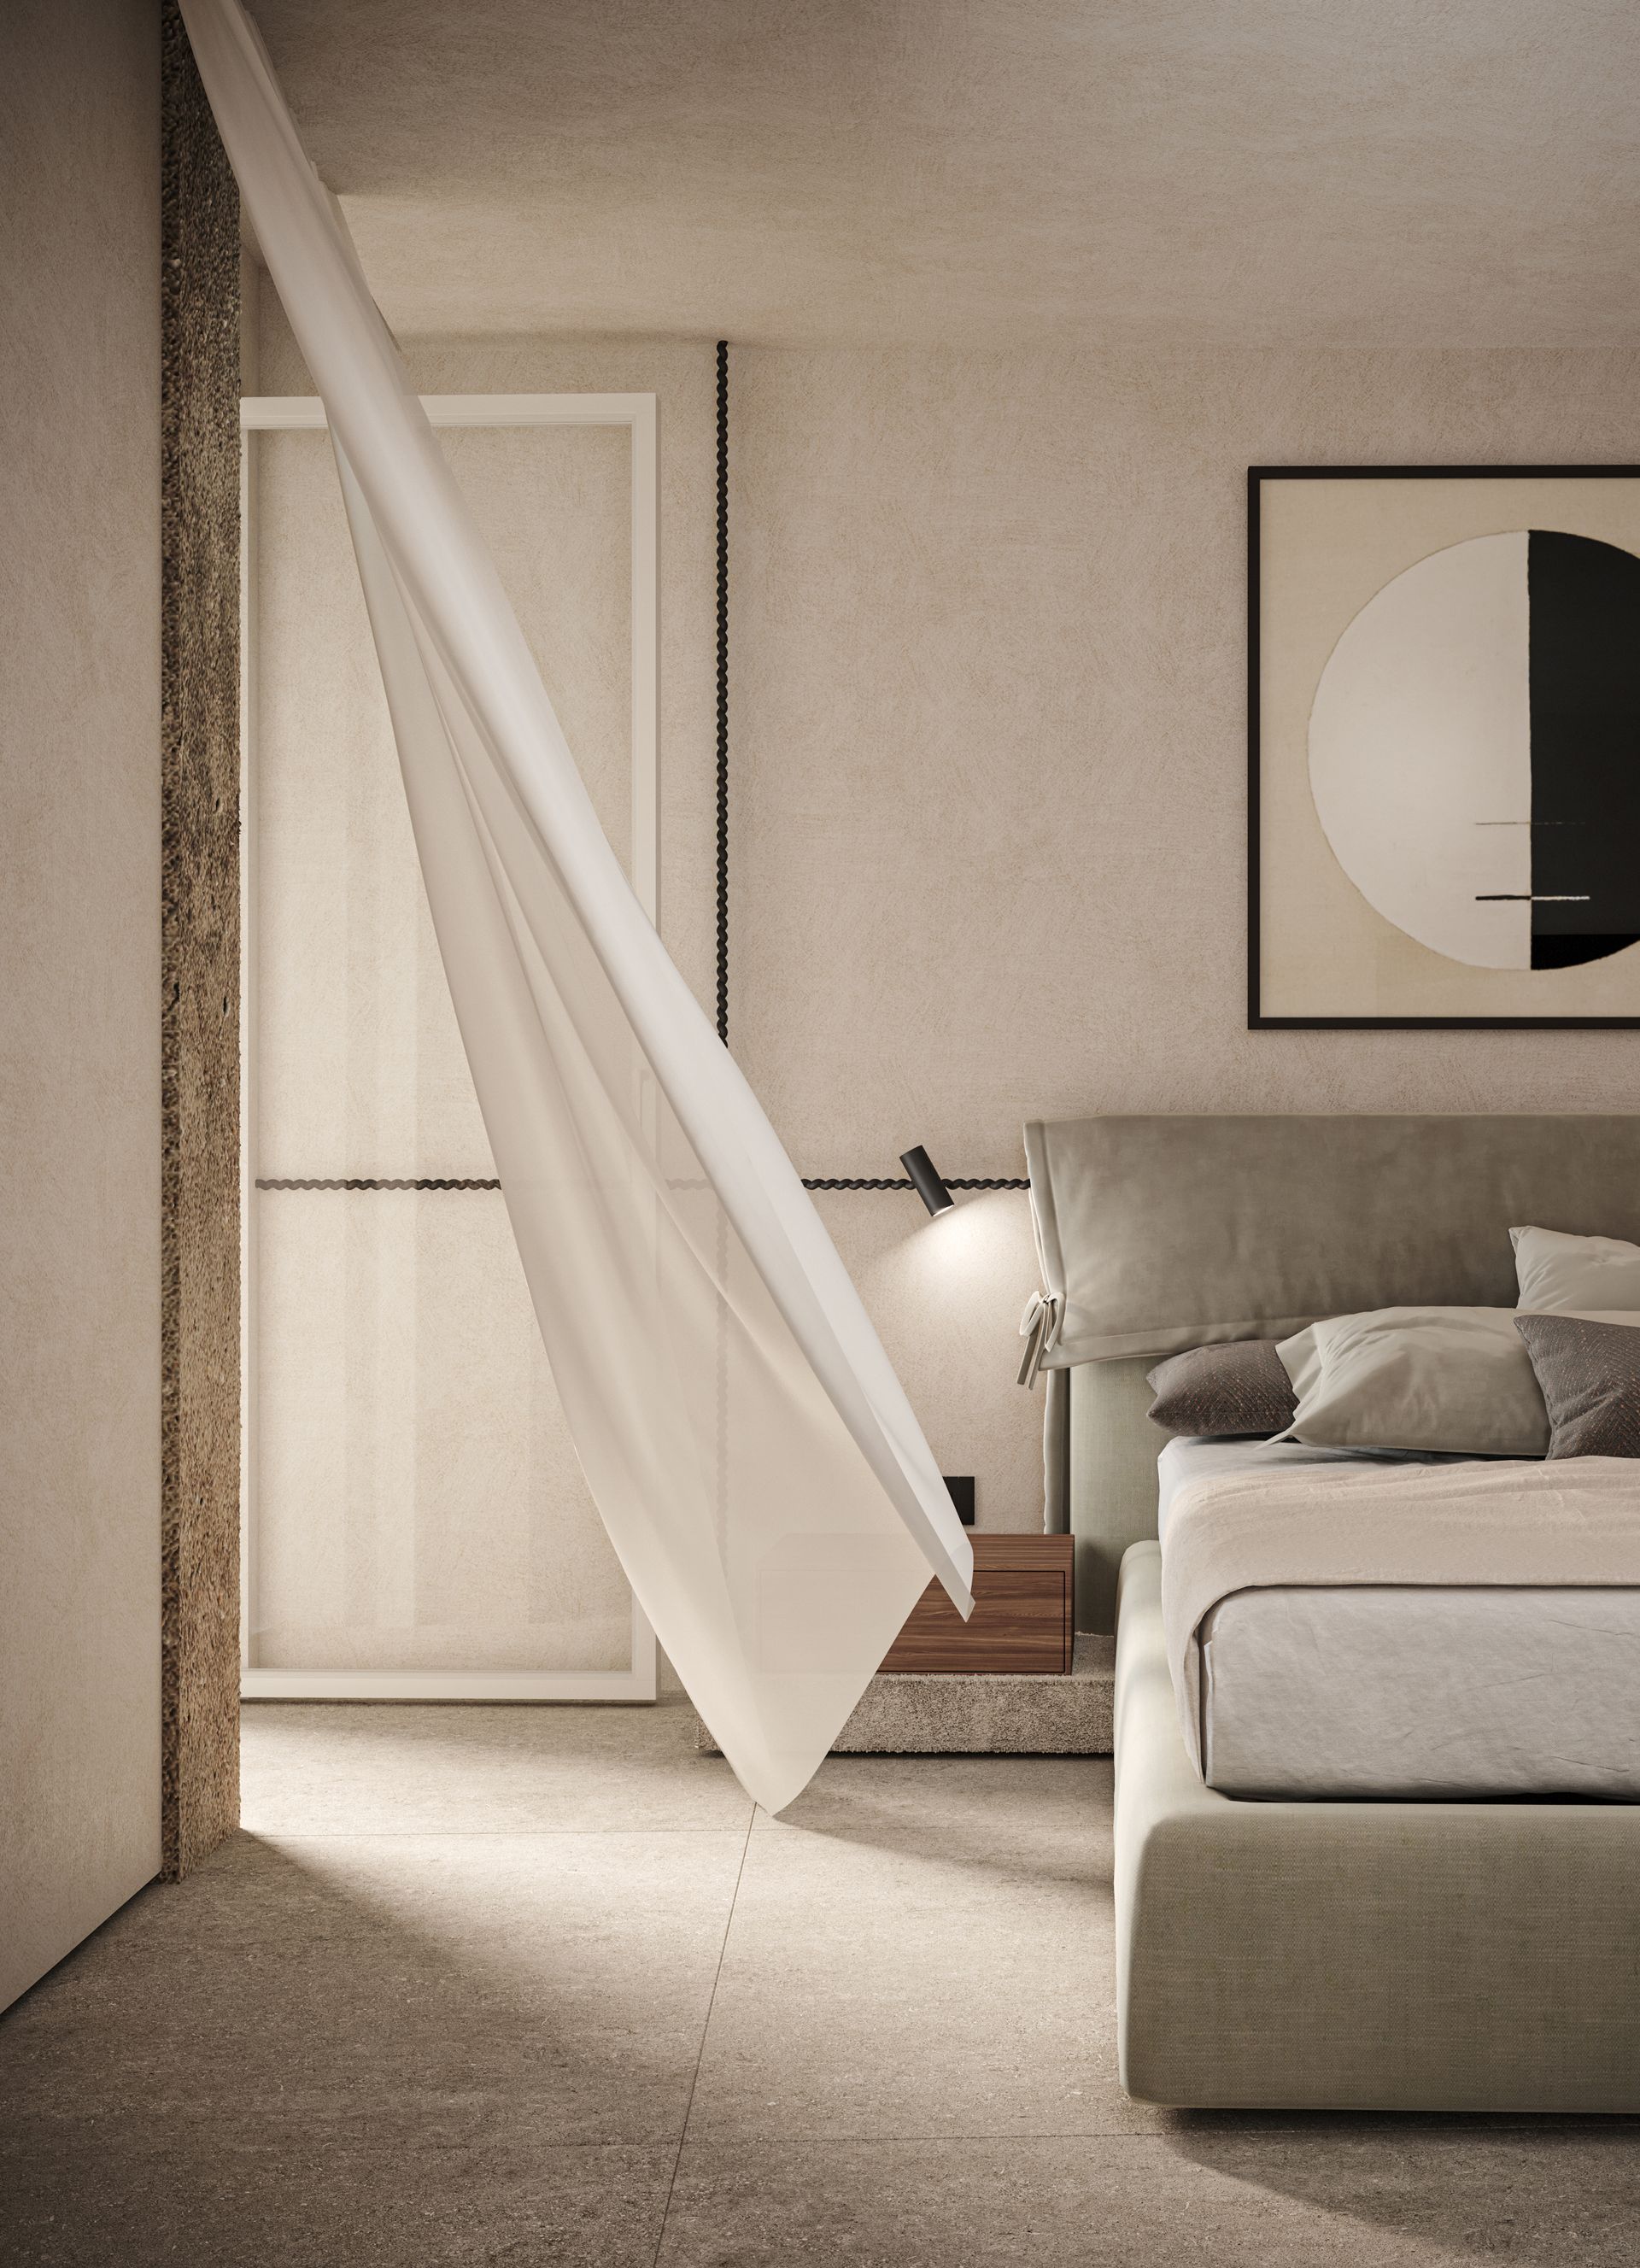 Beach house project, holiday home, tailor made furniture, cedar wood boiserie, Forte dei Marmi, Miami, French Riviera, Cinque Terre, Adriatic. Officina Magisafi architecture design - bedroom detail rendering